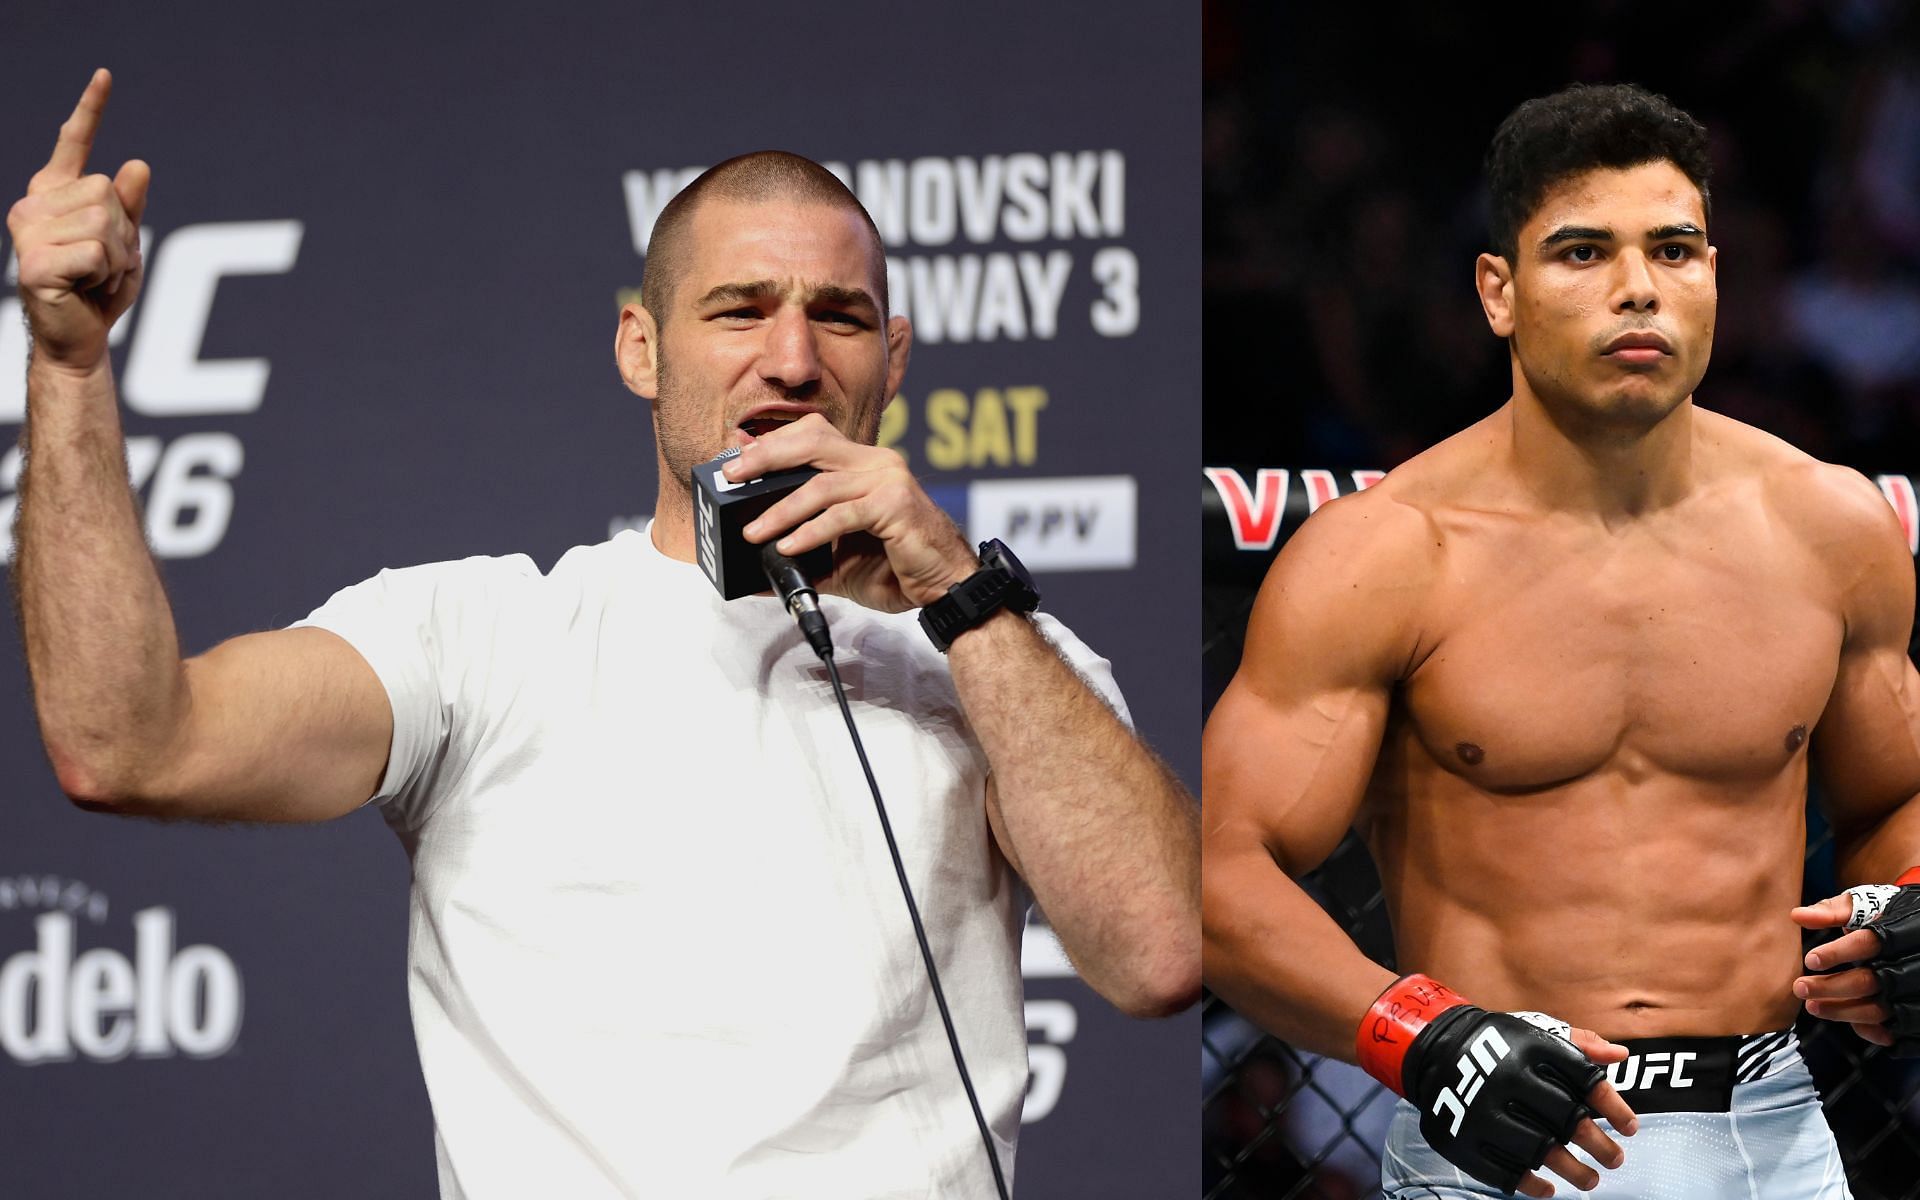 Sean Strickland (left) and Paulo Costa (right). [via Getty Images]